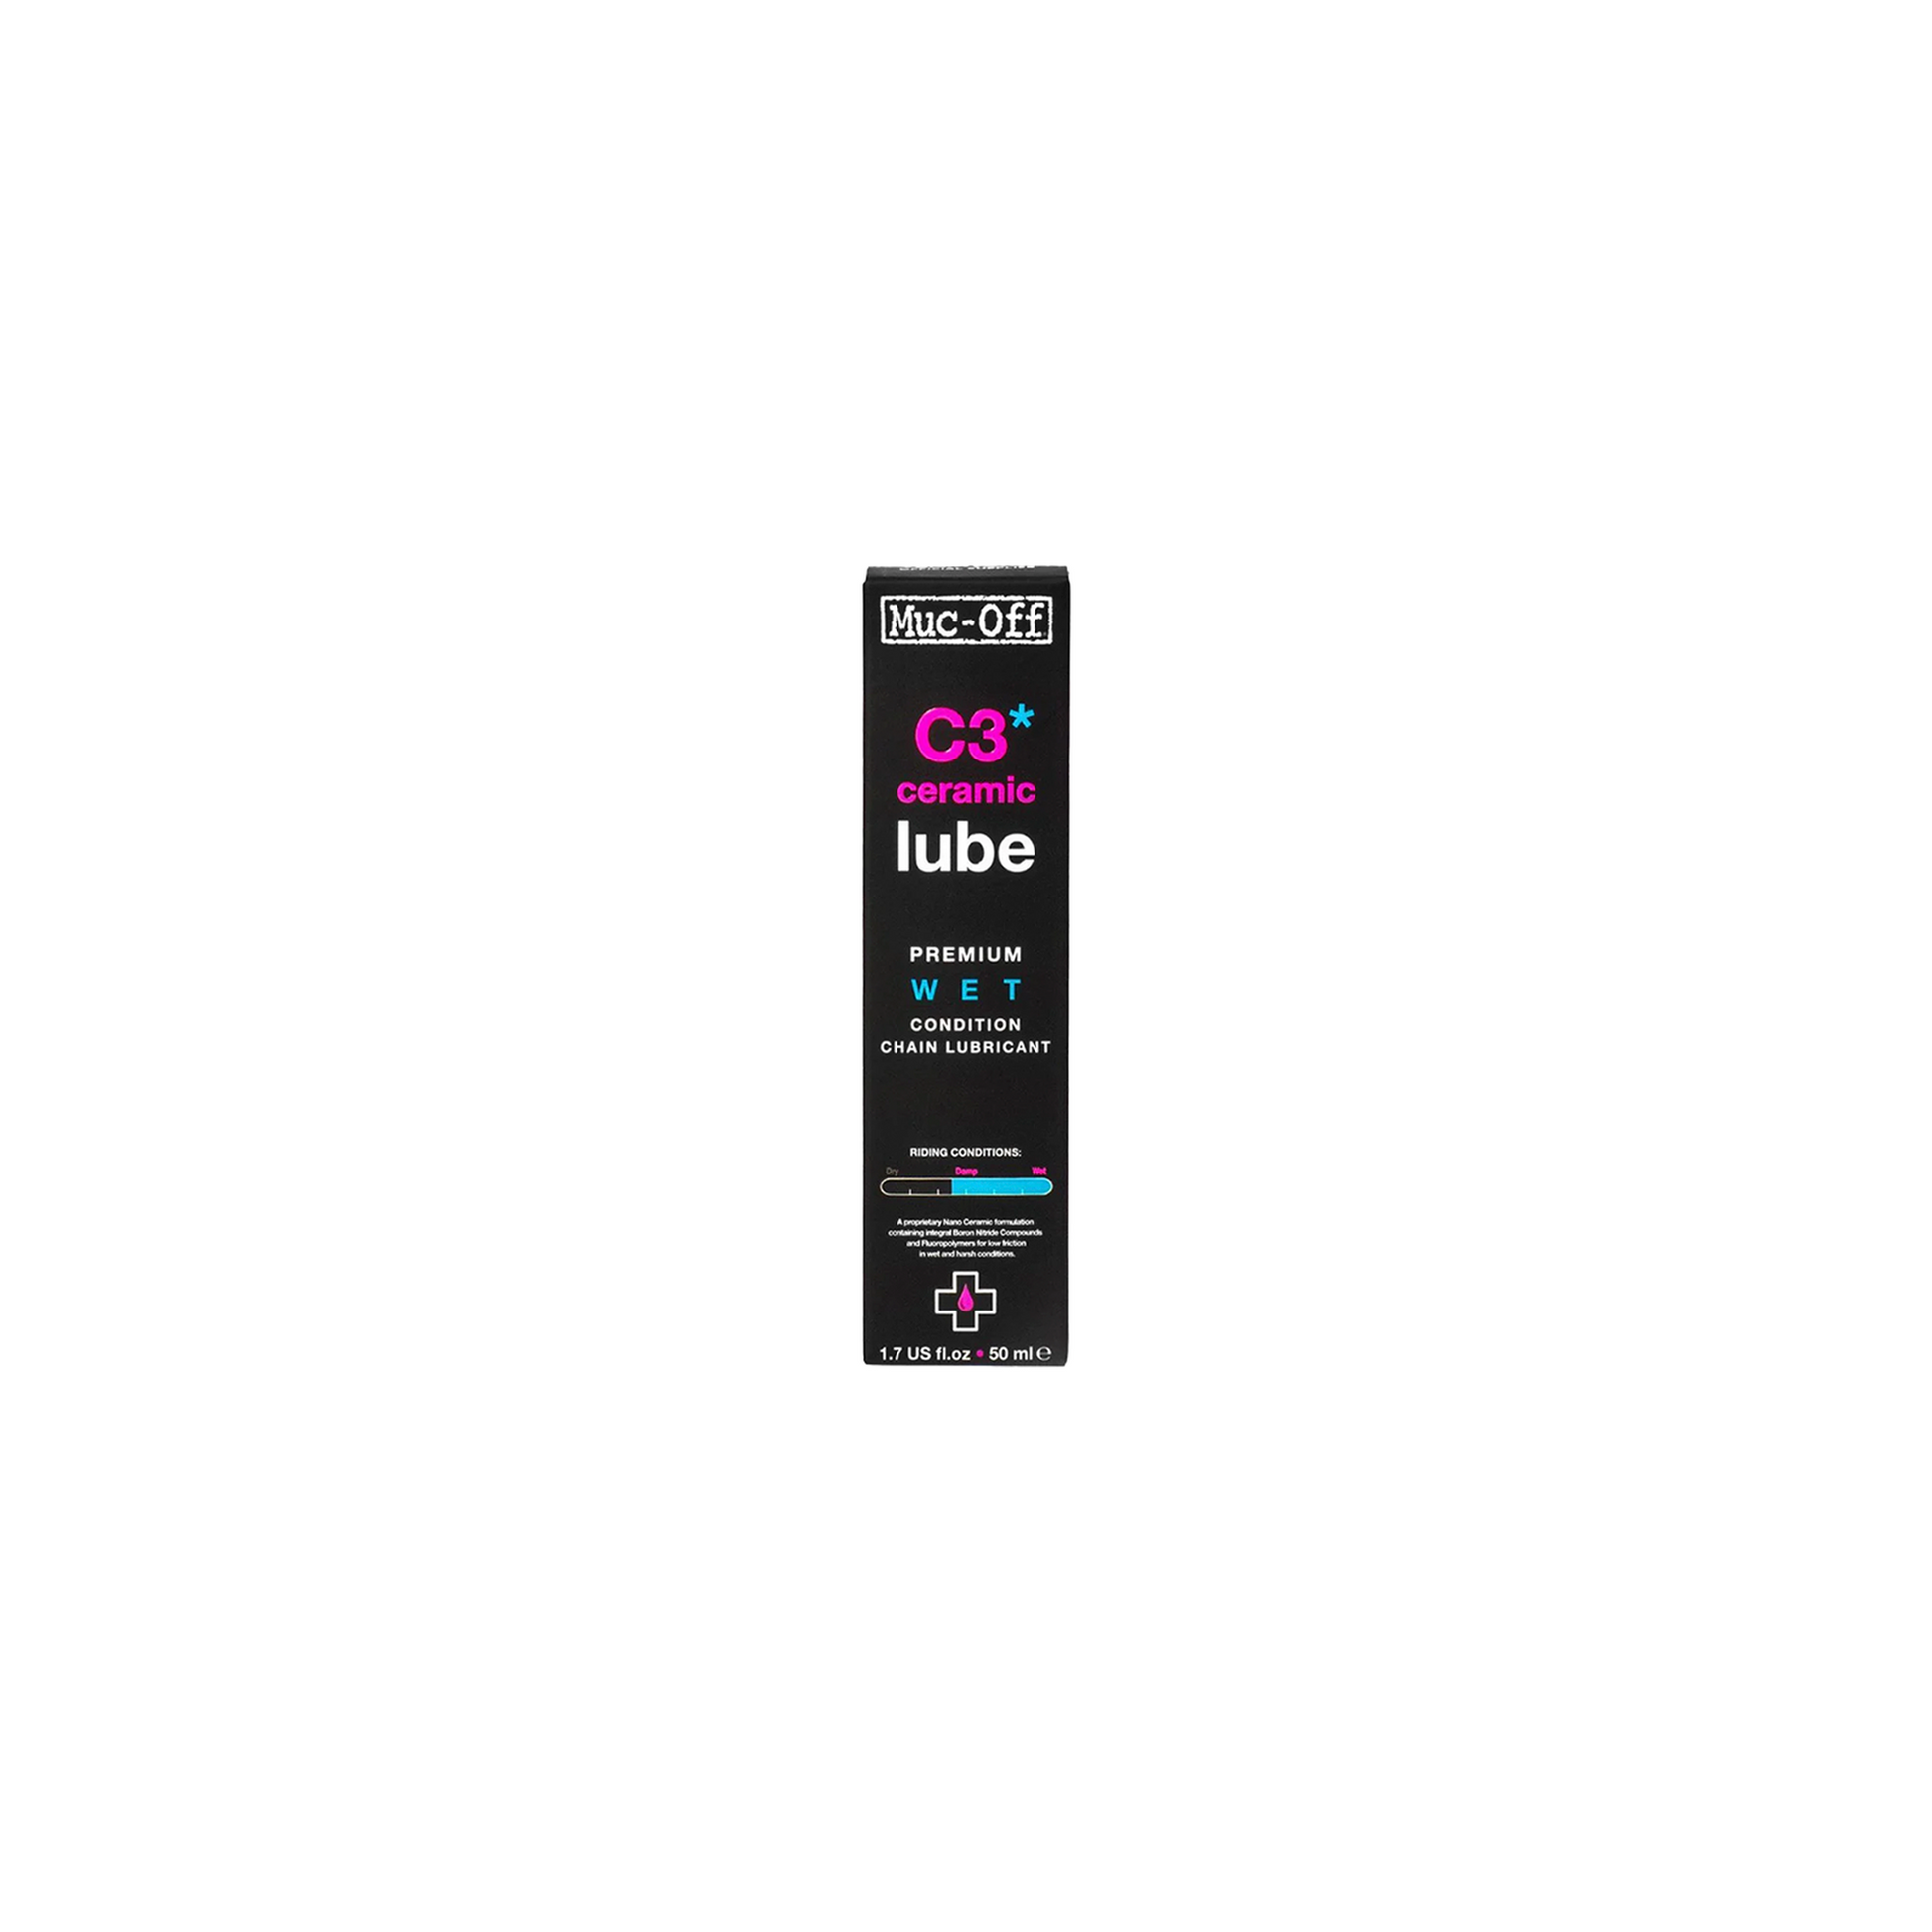 Muc-Off C3 Wet Weather Ceramic Lube | completecyclist - Product Description: Whenever it’s wet outside, reach for C3 Wet Weather Ceramic Lube to keep things running smoothly. Welcome to the future of drivetrain